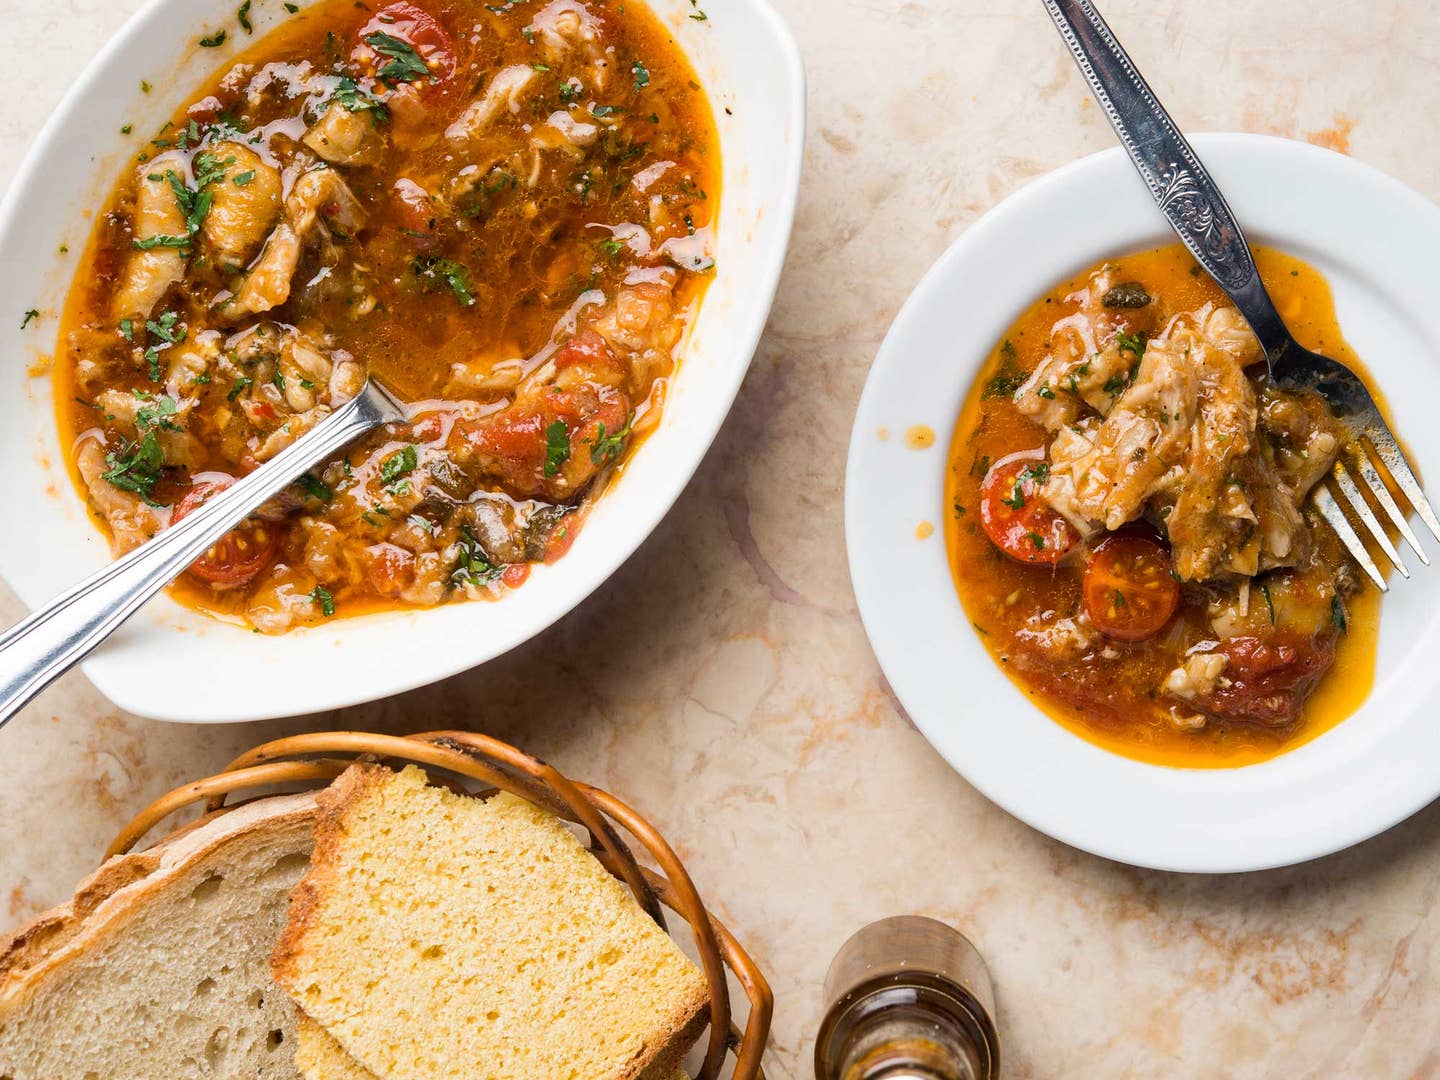 Make This Portuguese Surf-and-Turf for a One-Pot Meal